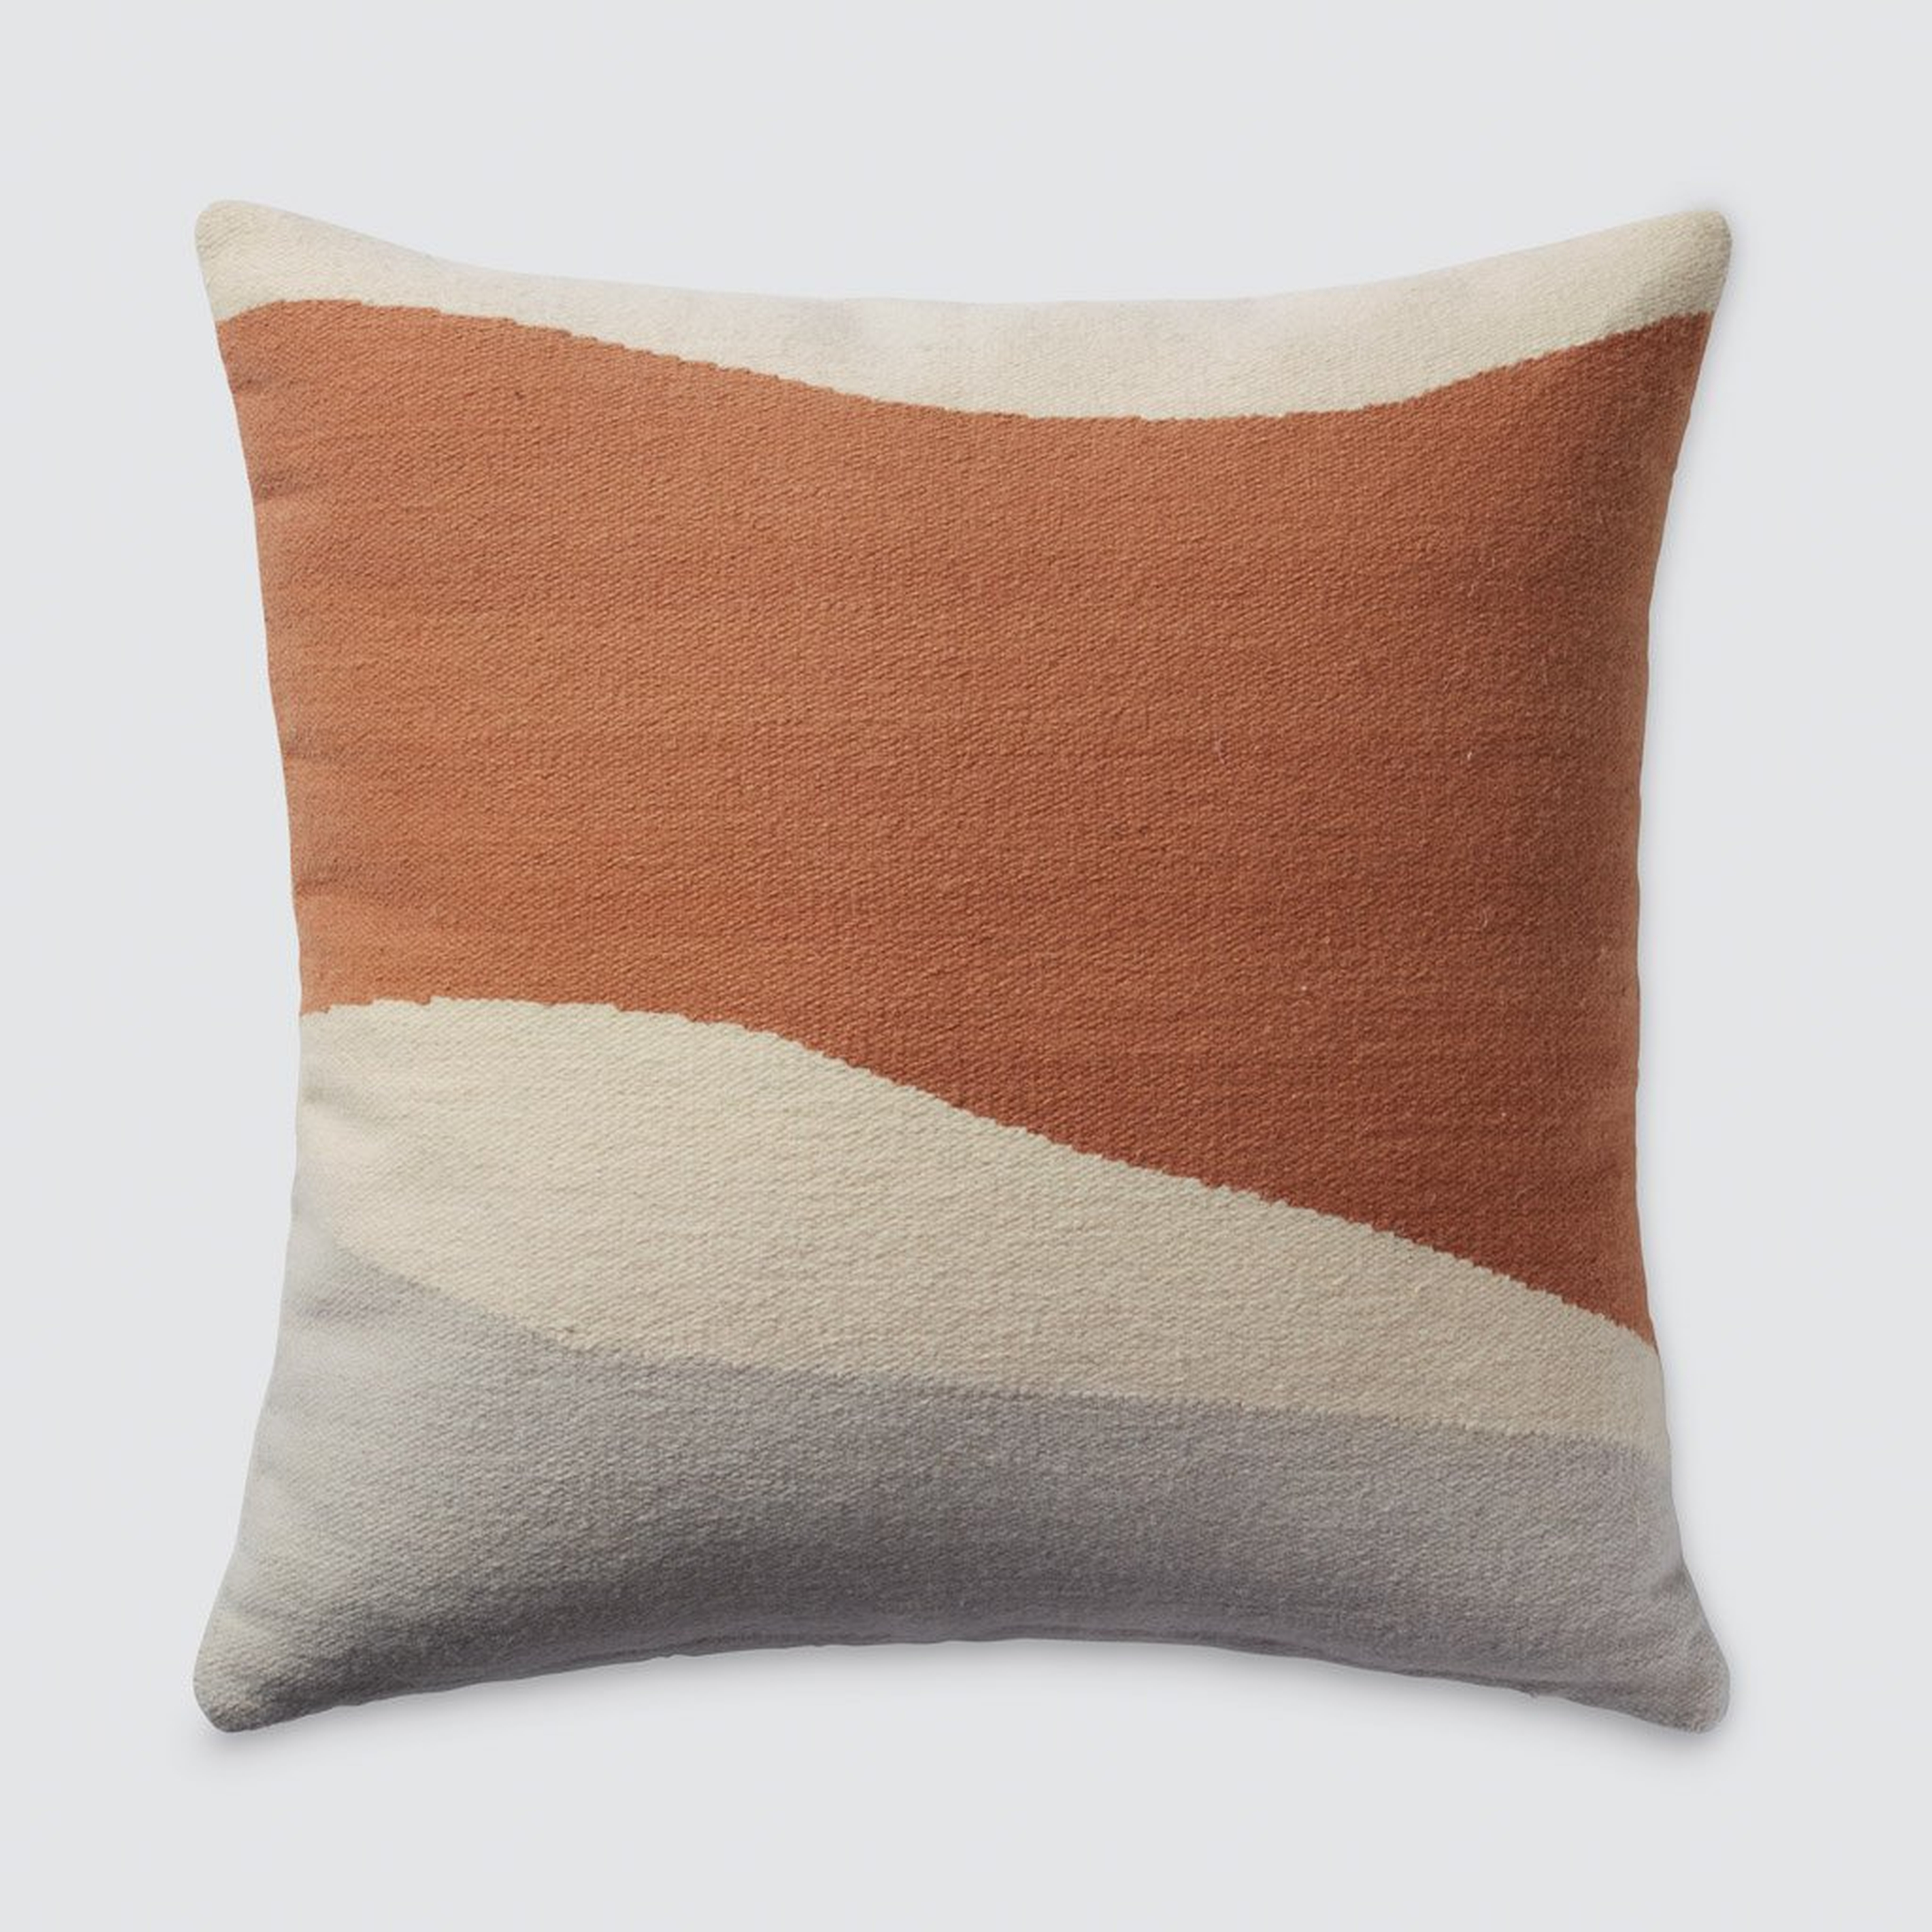 Las Colinas Pillow - 22 in. x 22 in. By The Citizenry - The Citizenry